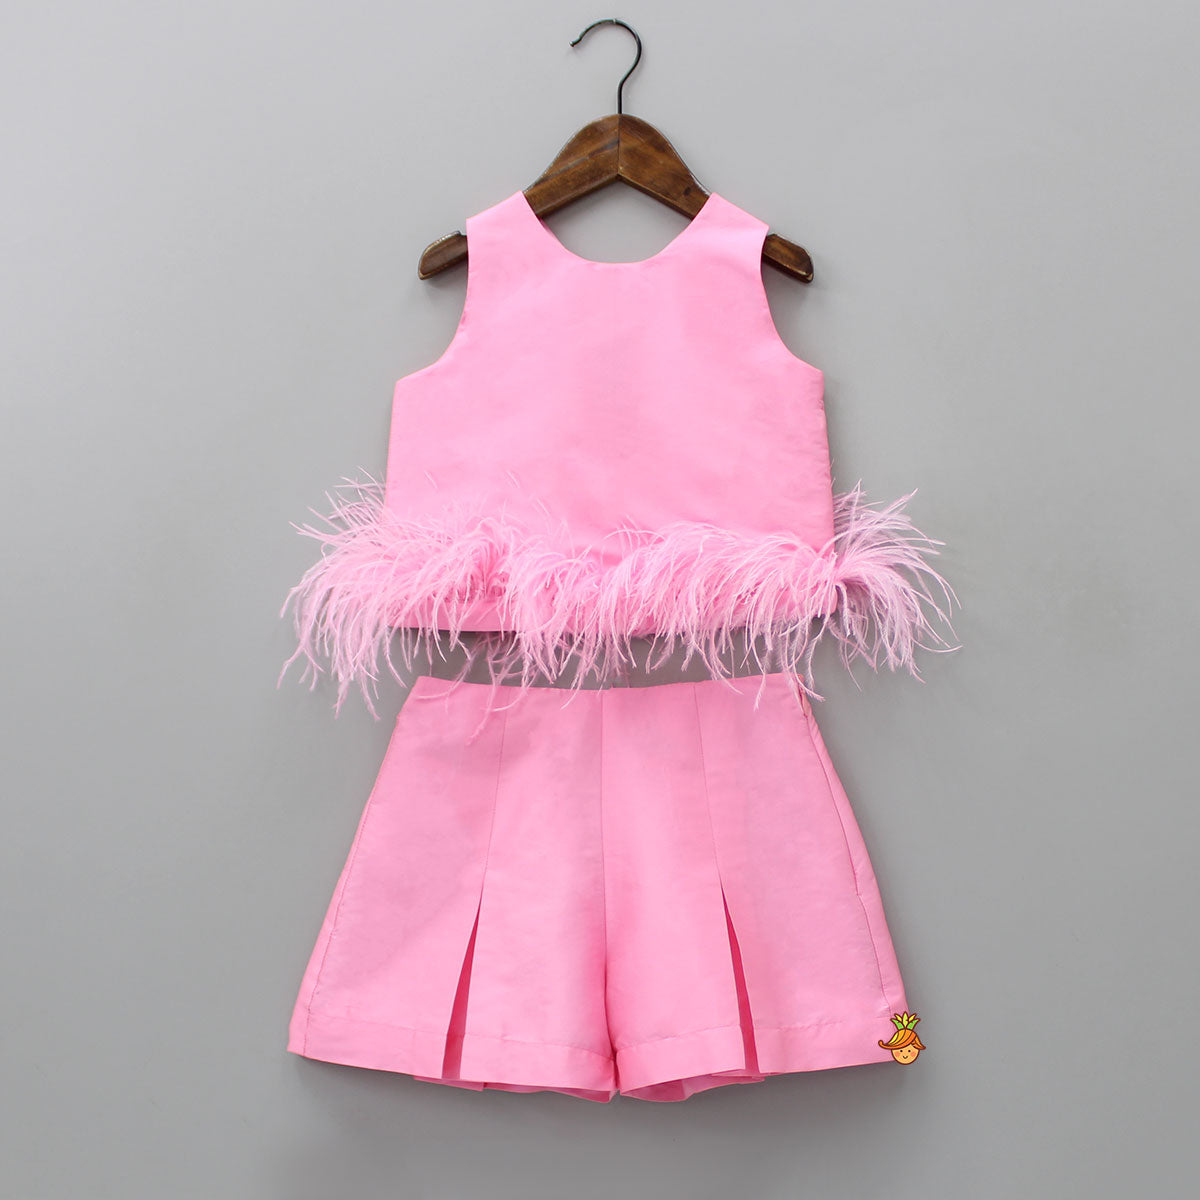 Pre Order: Playful Pink Top With Skirt Style Shorts